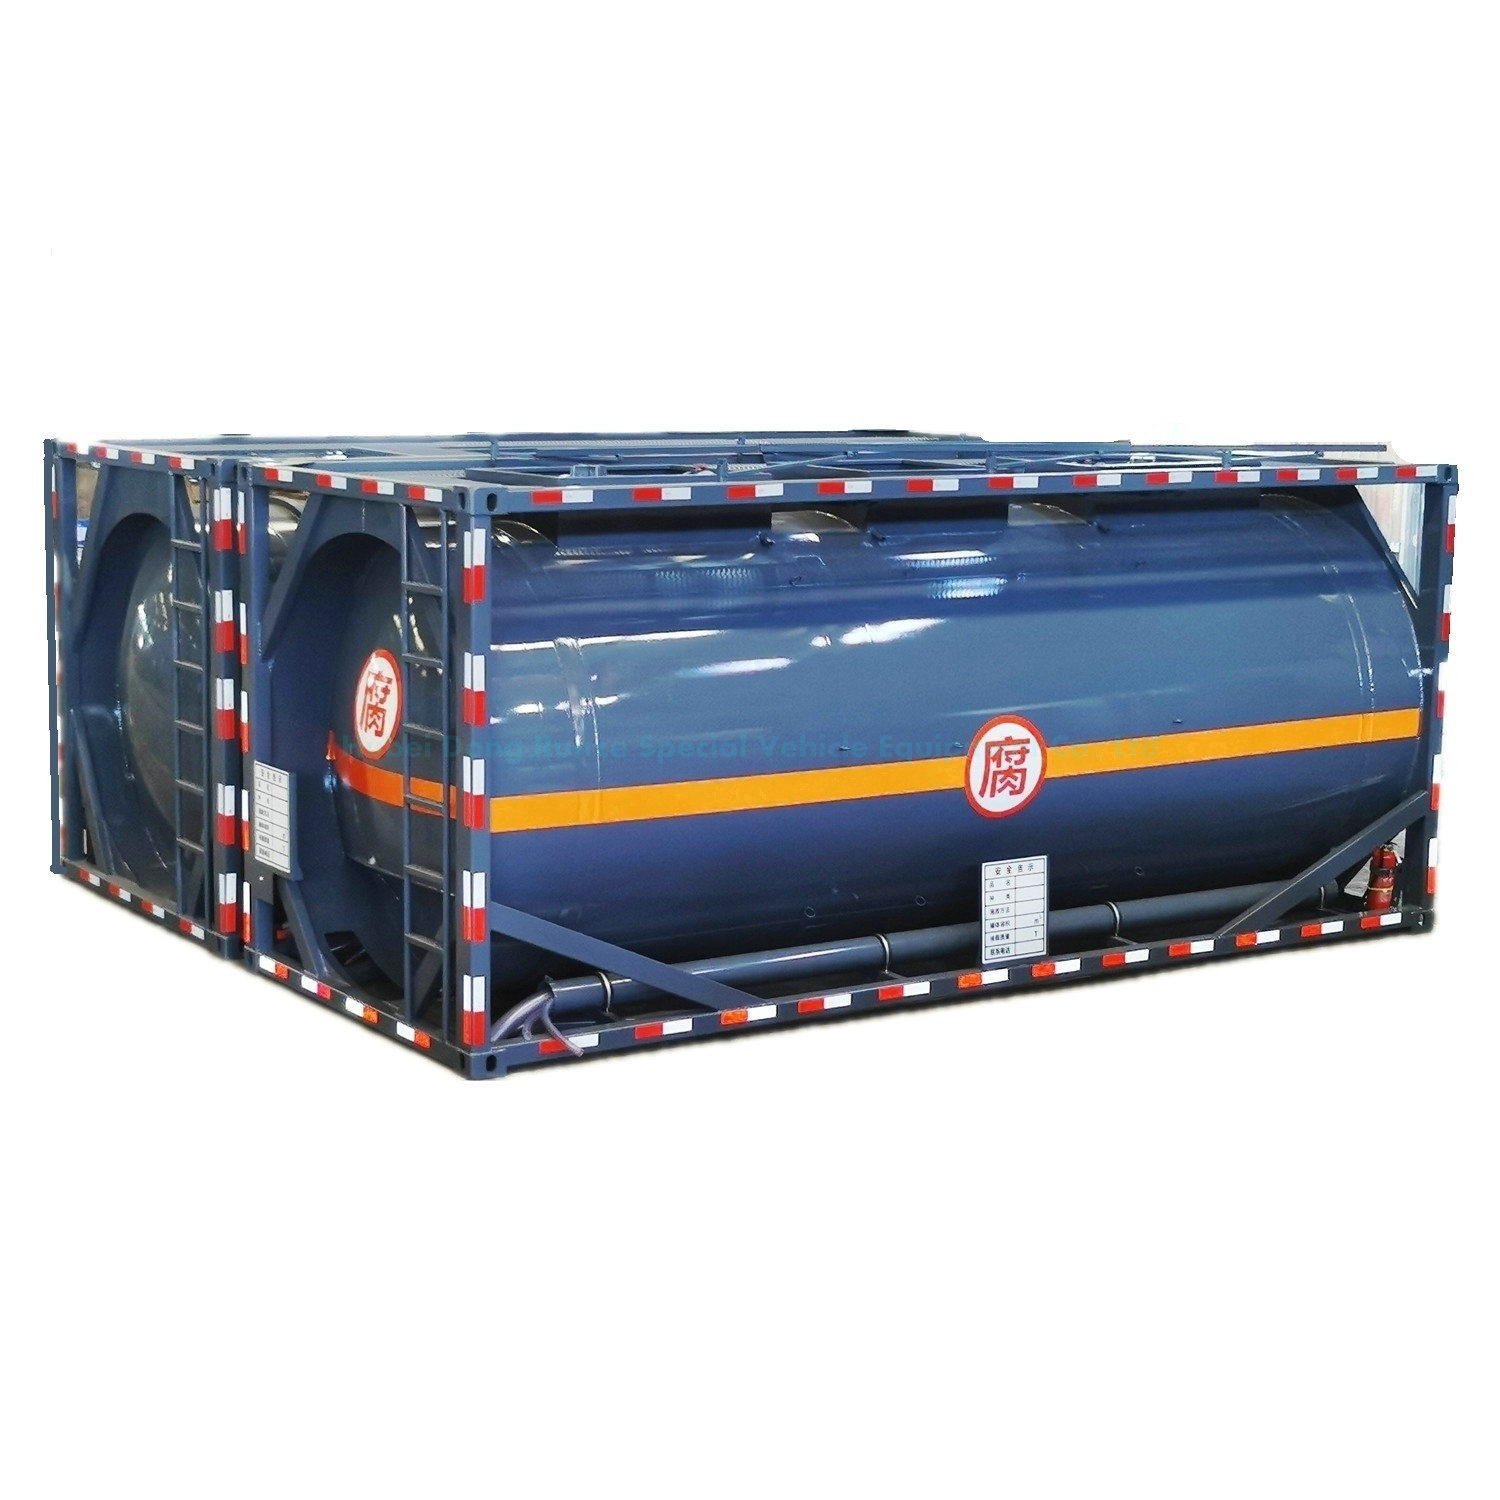 20 Ft Lined PE Petrochemicals ISO Tank Container for Corrosive Nitric Acid, Sodium Hydroxide, Hydrochloric Acid, Phosphoric Sulphuric Acid